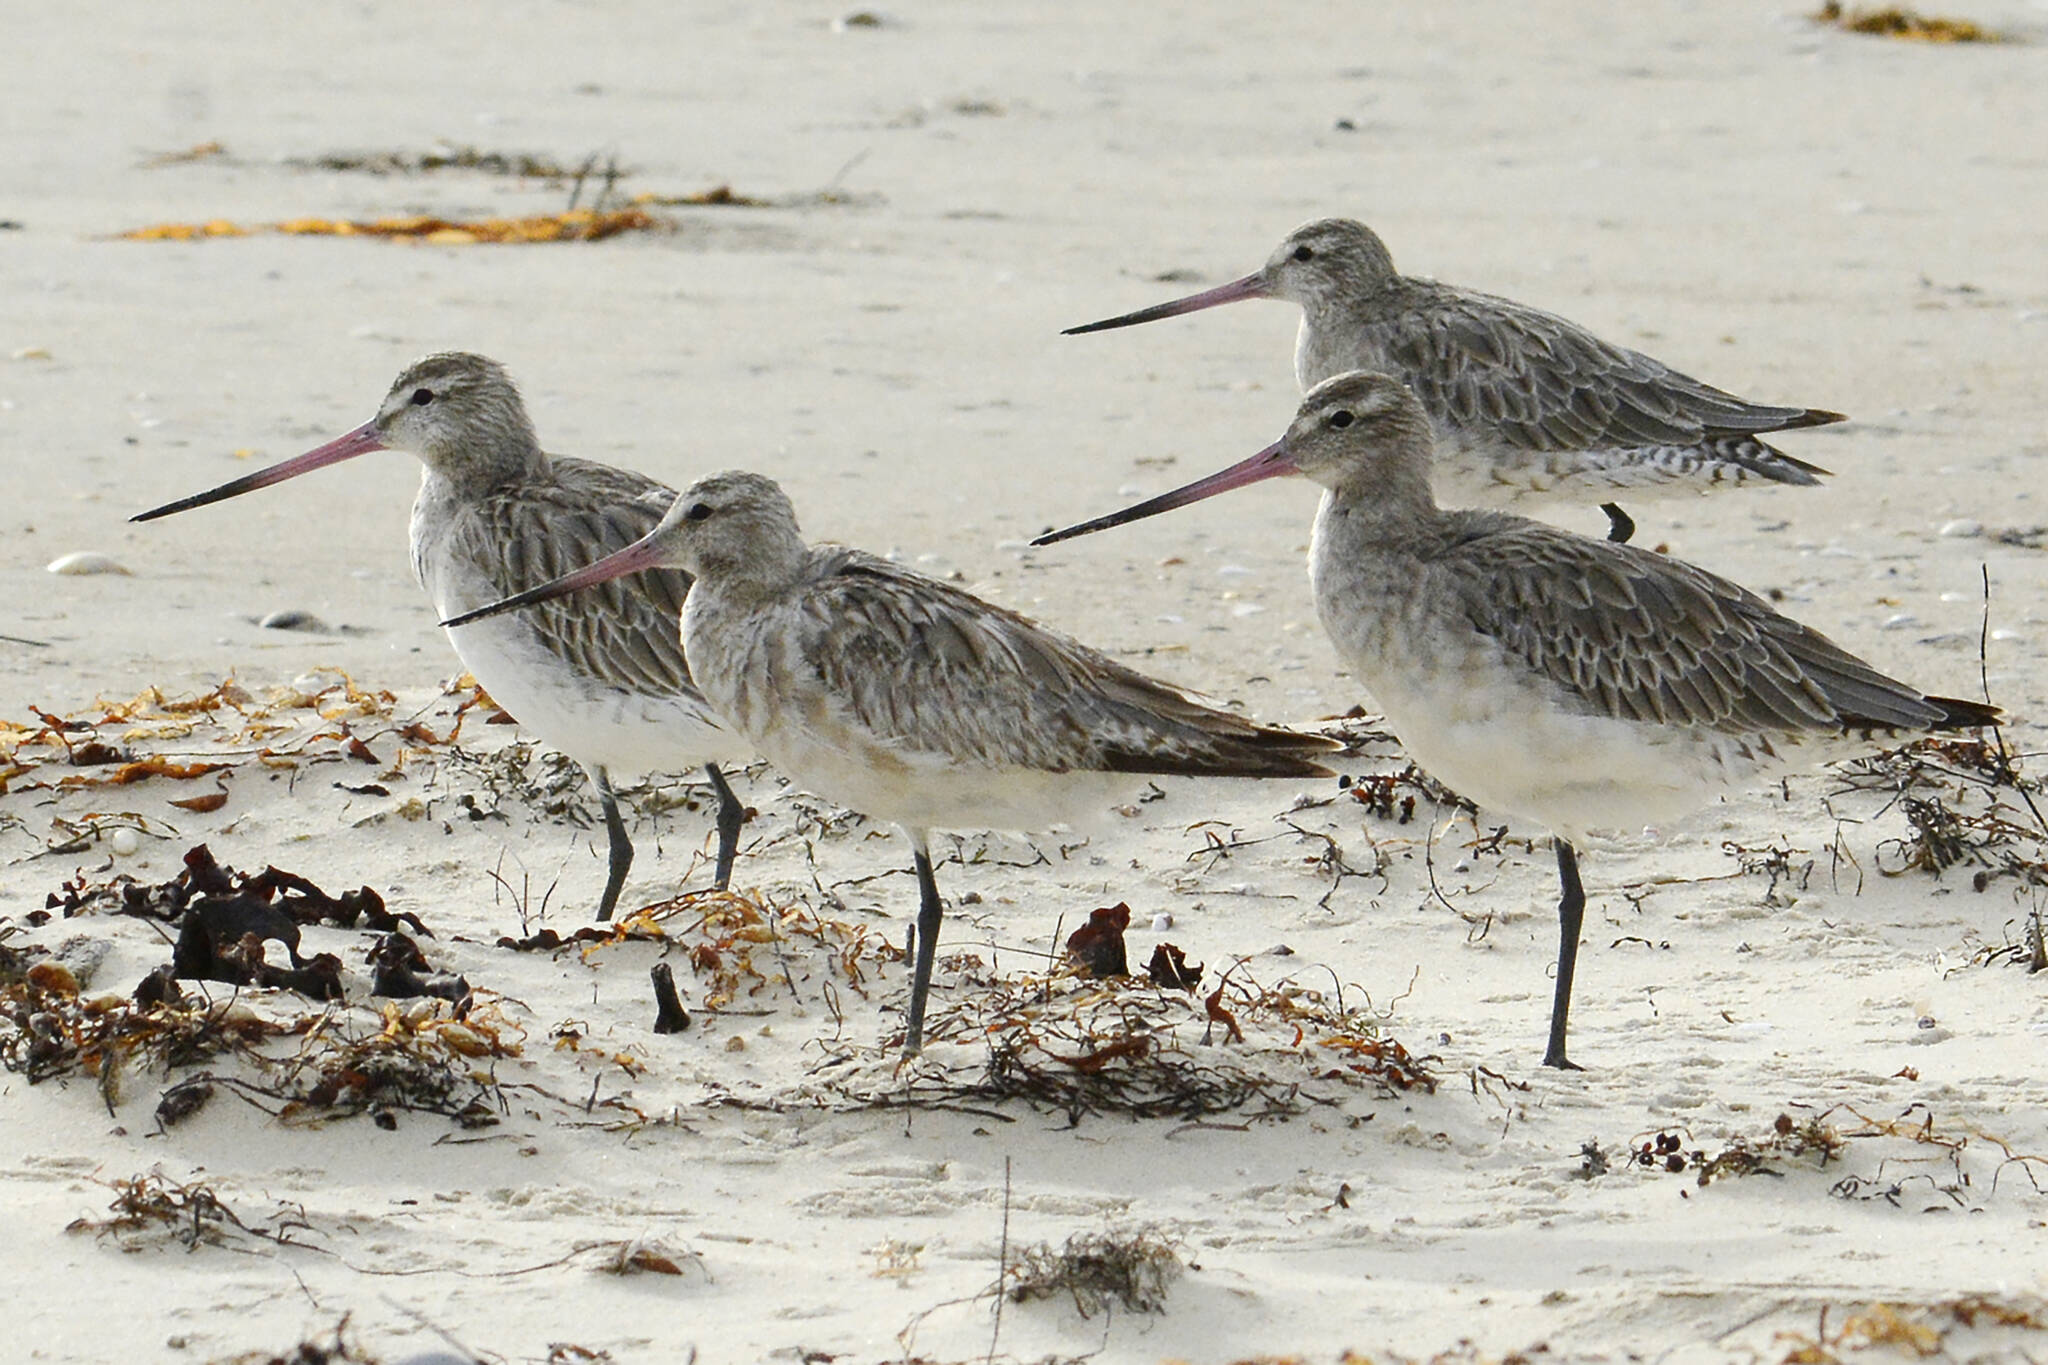 Bar-tailed godwits stand on the beach at Marion Bay in Australia's Tasmania state on Feb. 17, 2018. A young bar-tailed godwit appears to have set a non-stop distance record for migratory birds by flying at least 13,560 kilometers (8,435 miles) from Alaska to the Australian state of Tasmania, a bird expert said Friday, Oct. 28, 2022. (Eric Woehler)